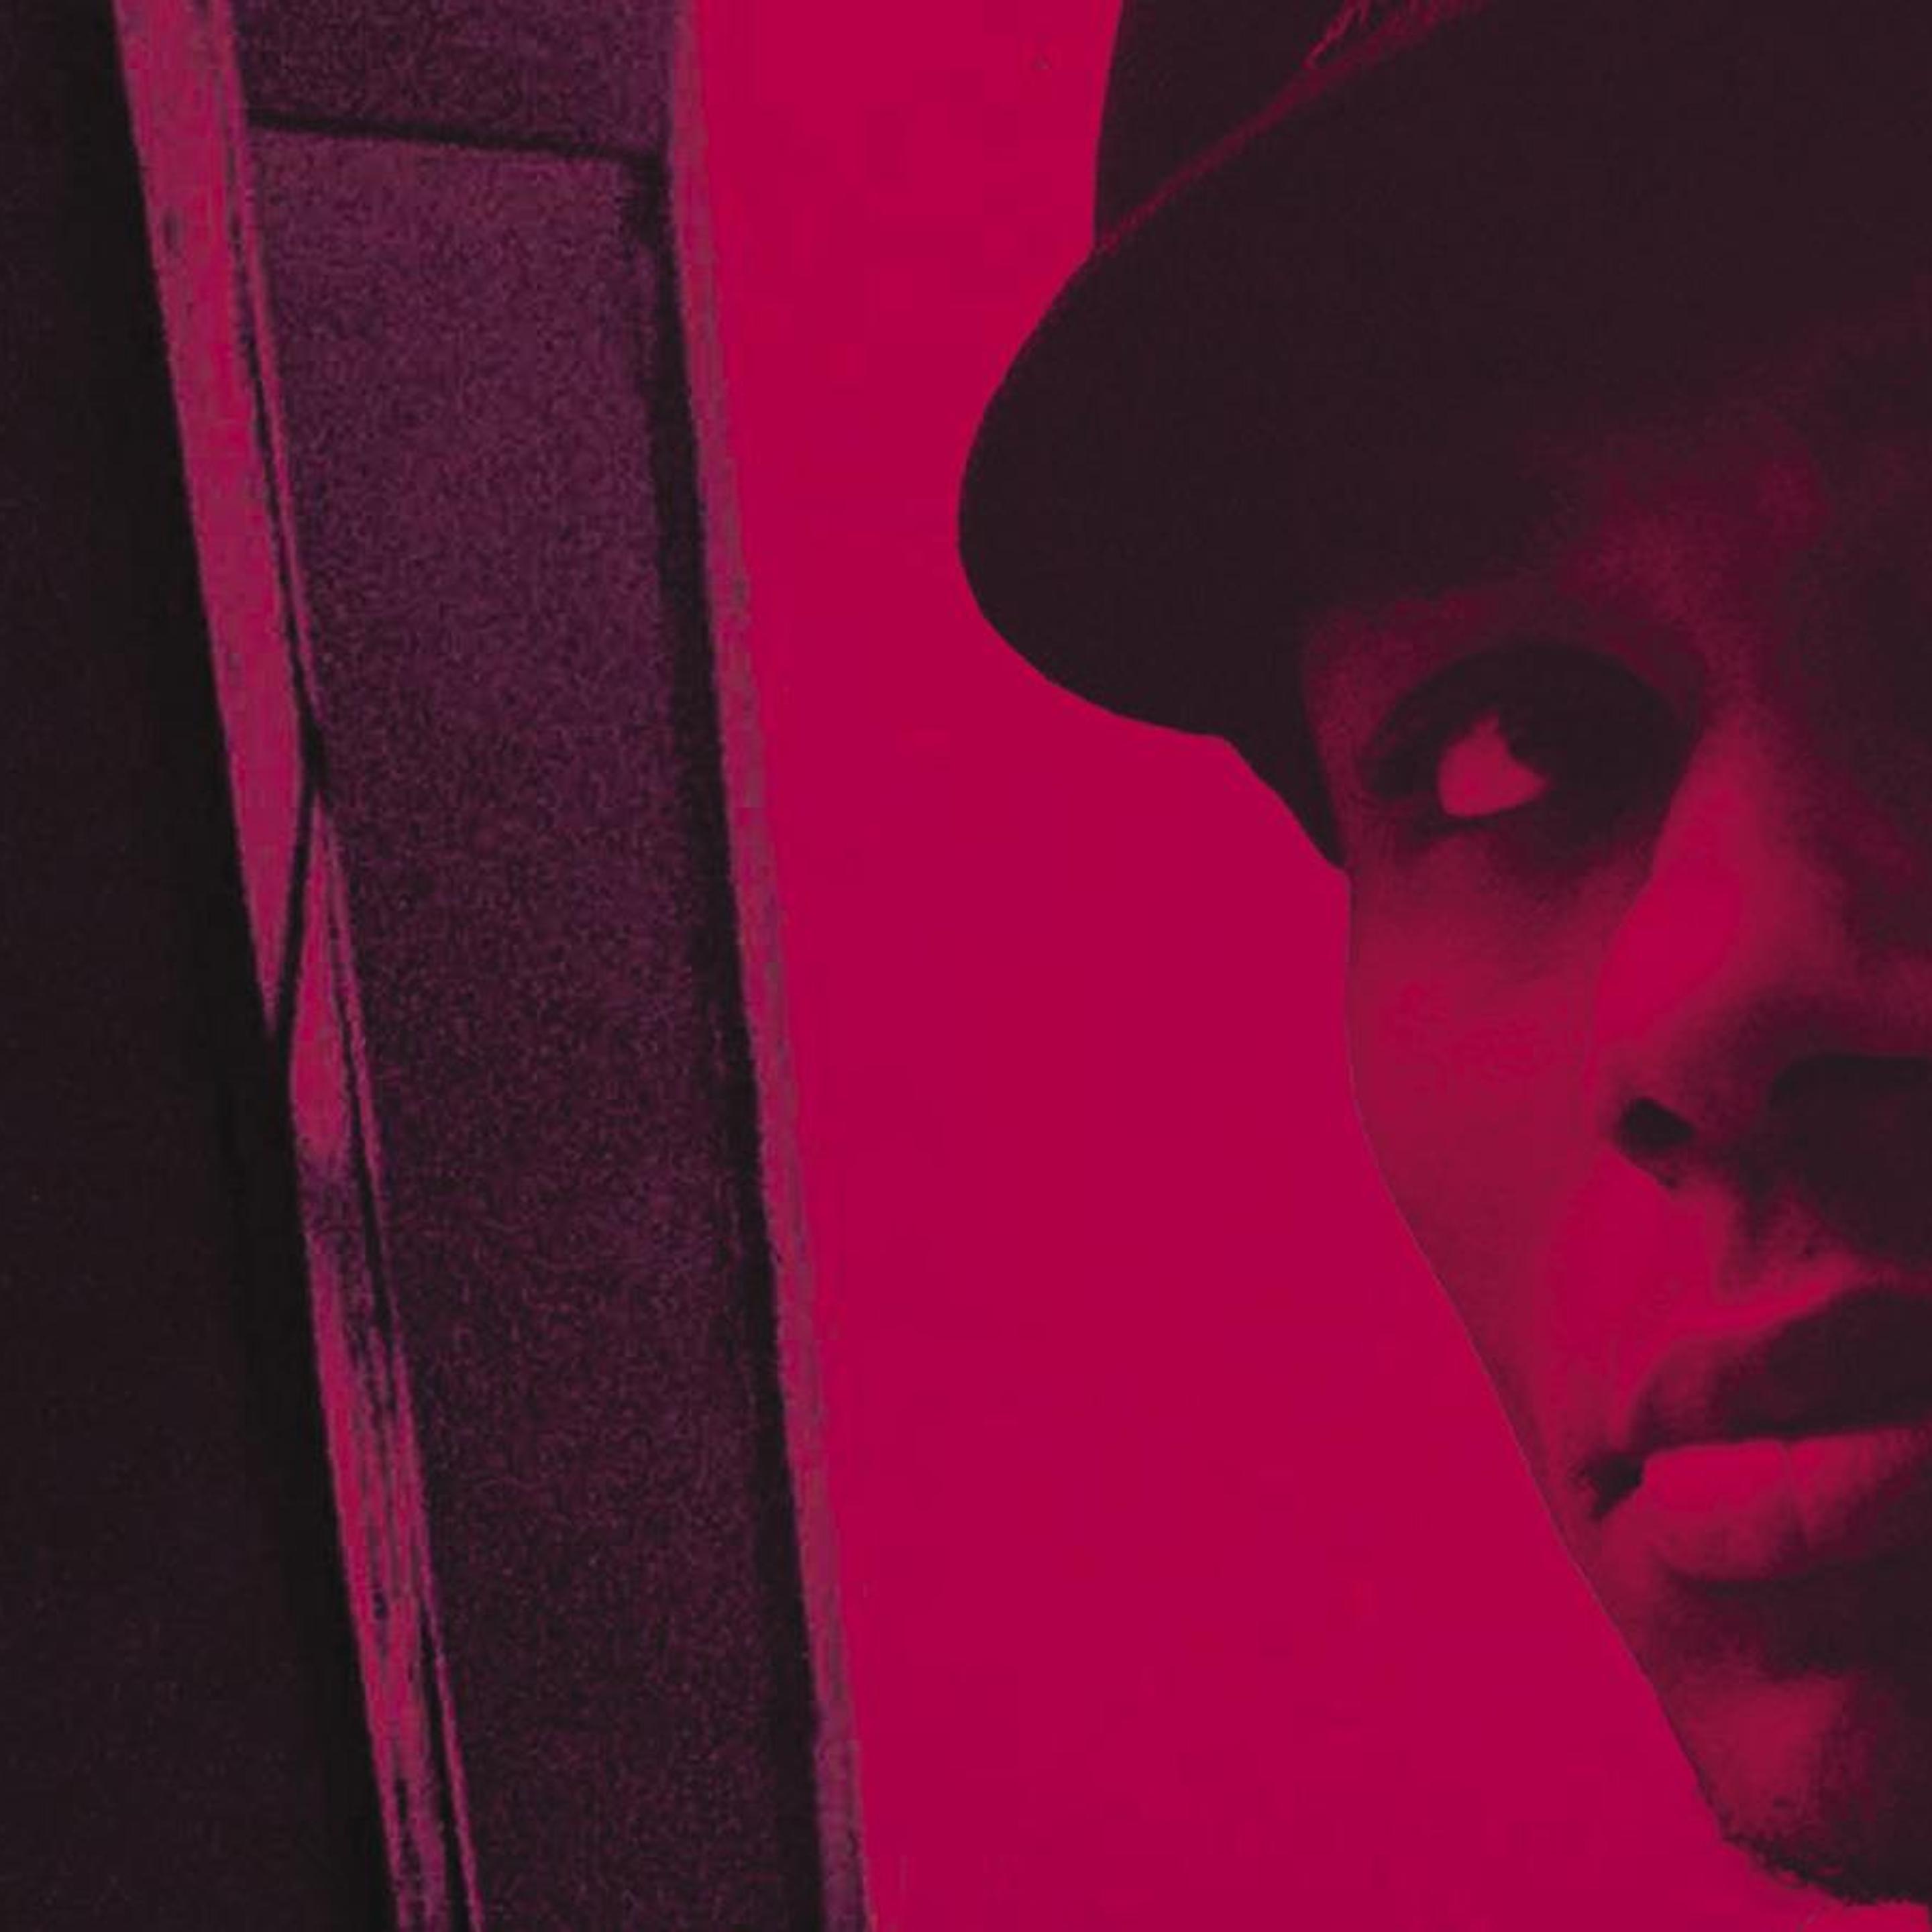 A headshot of Yasiin Bey wearing a hat and looking upwards